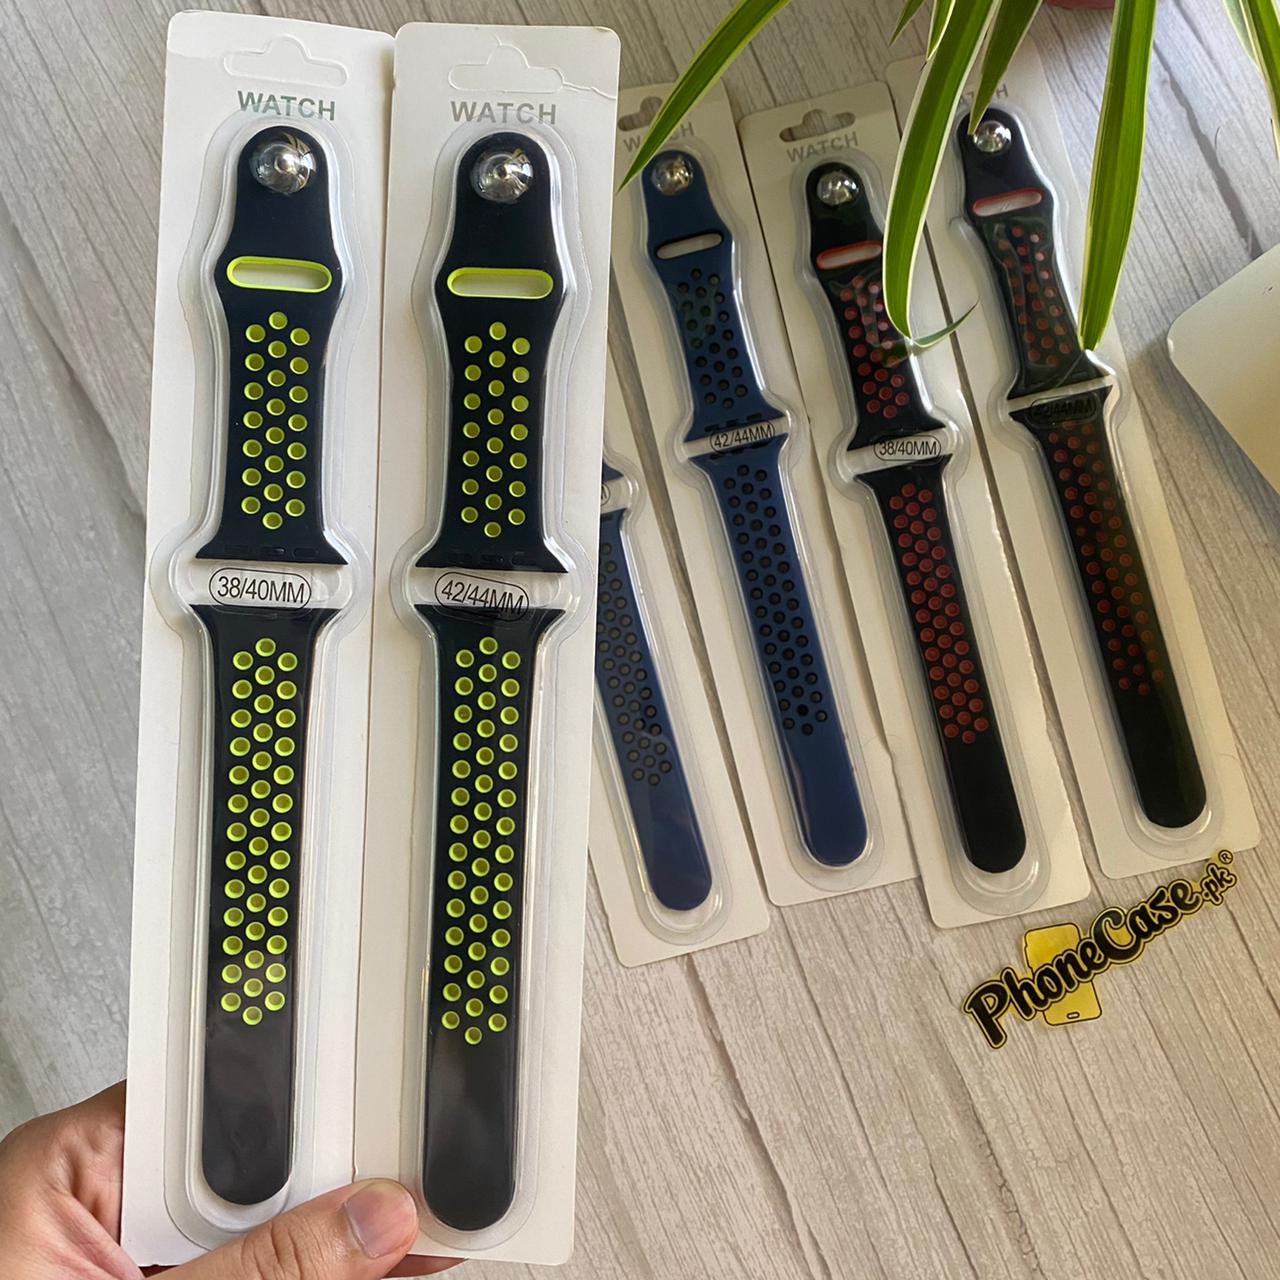 Nike Sports apple watch Band Strap for all series